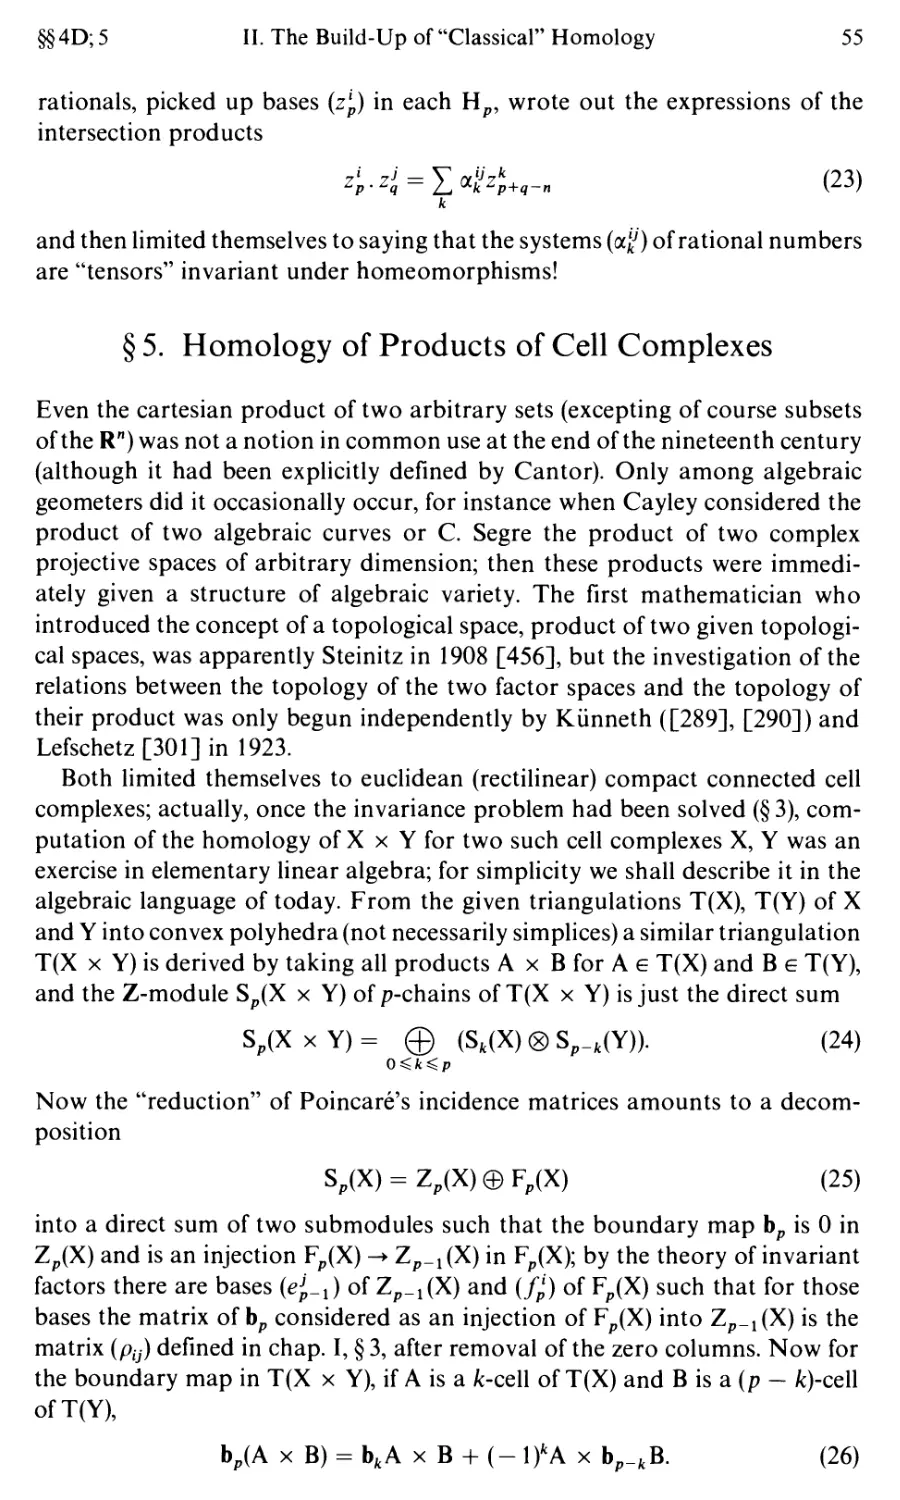 §5. Homology of Products of Cell Complexes